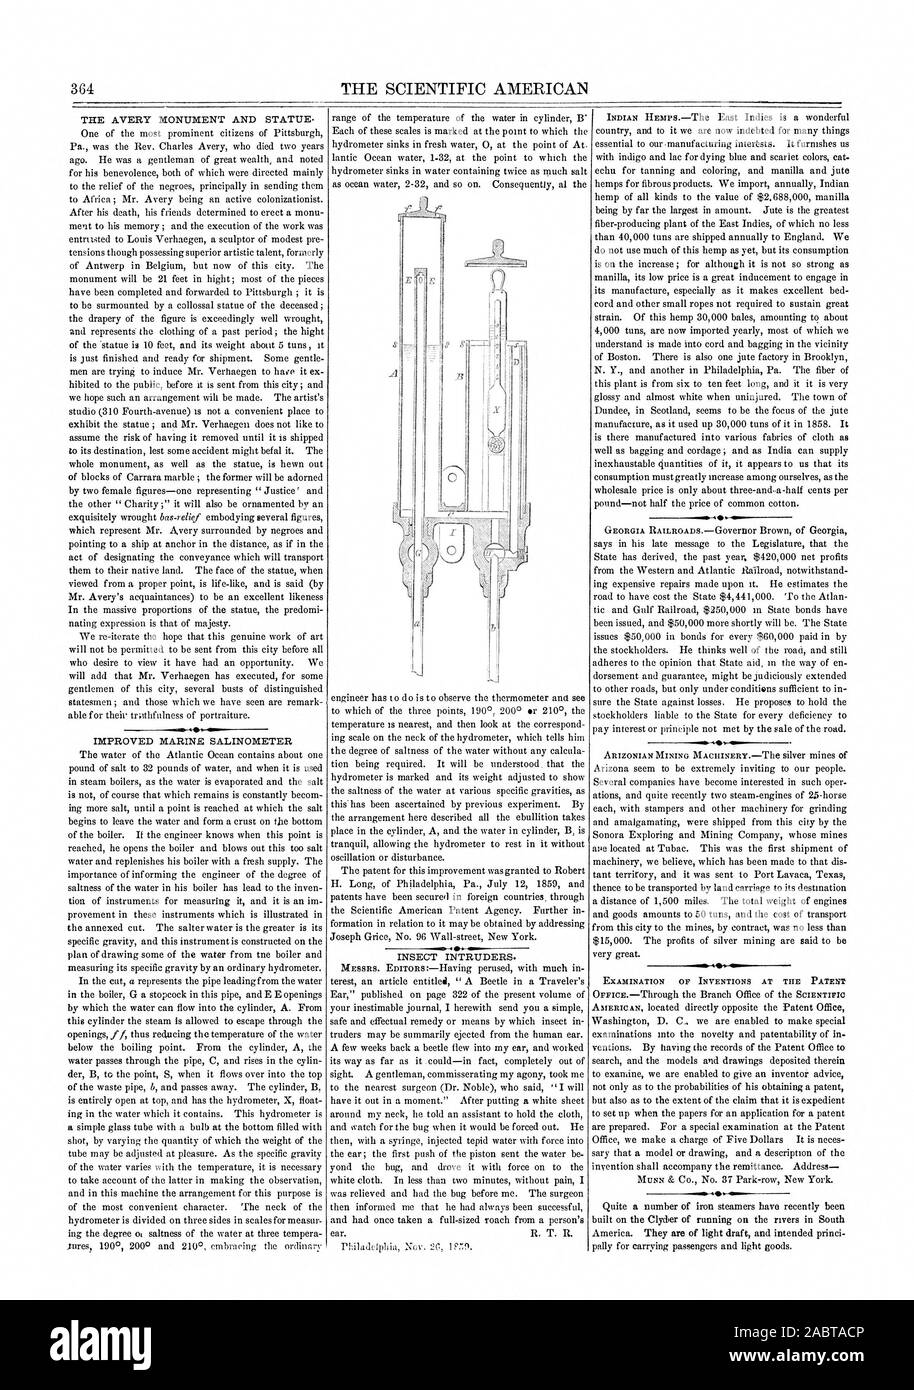 THE AVERY MONUMENT AND STATUE. IMPROVED MARINE SALINOMETER EXAMINATION OF INVENTIONS AT THE PATEST, scientific american, 1859-12-03 Stock Photo